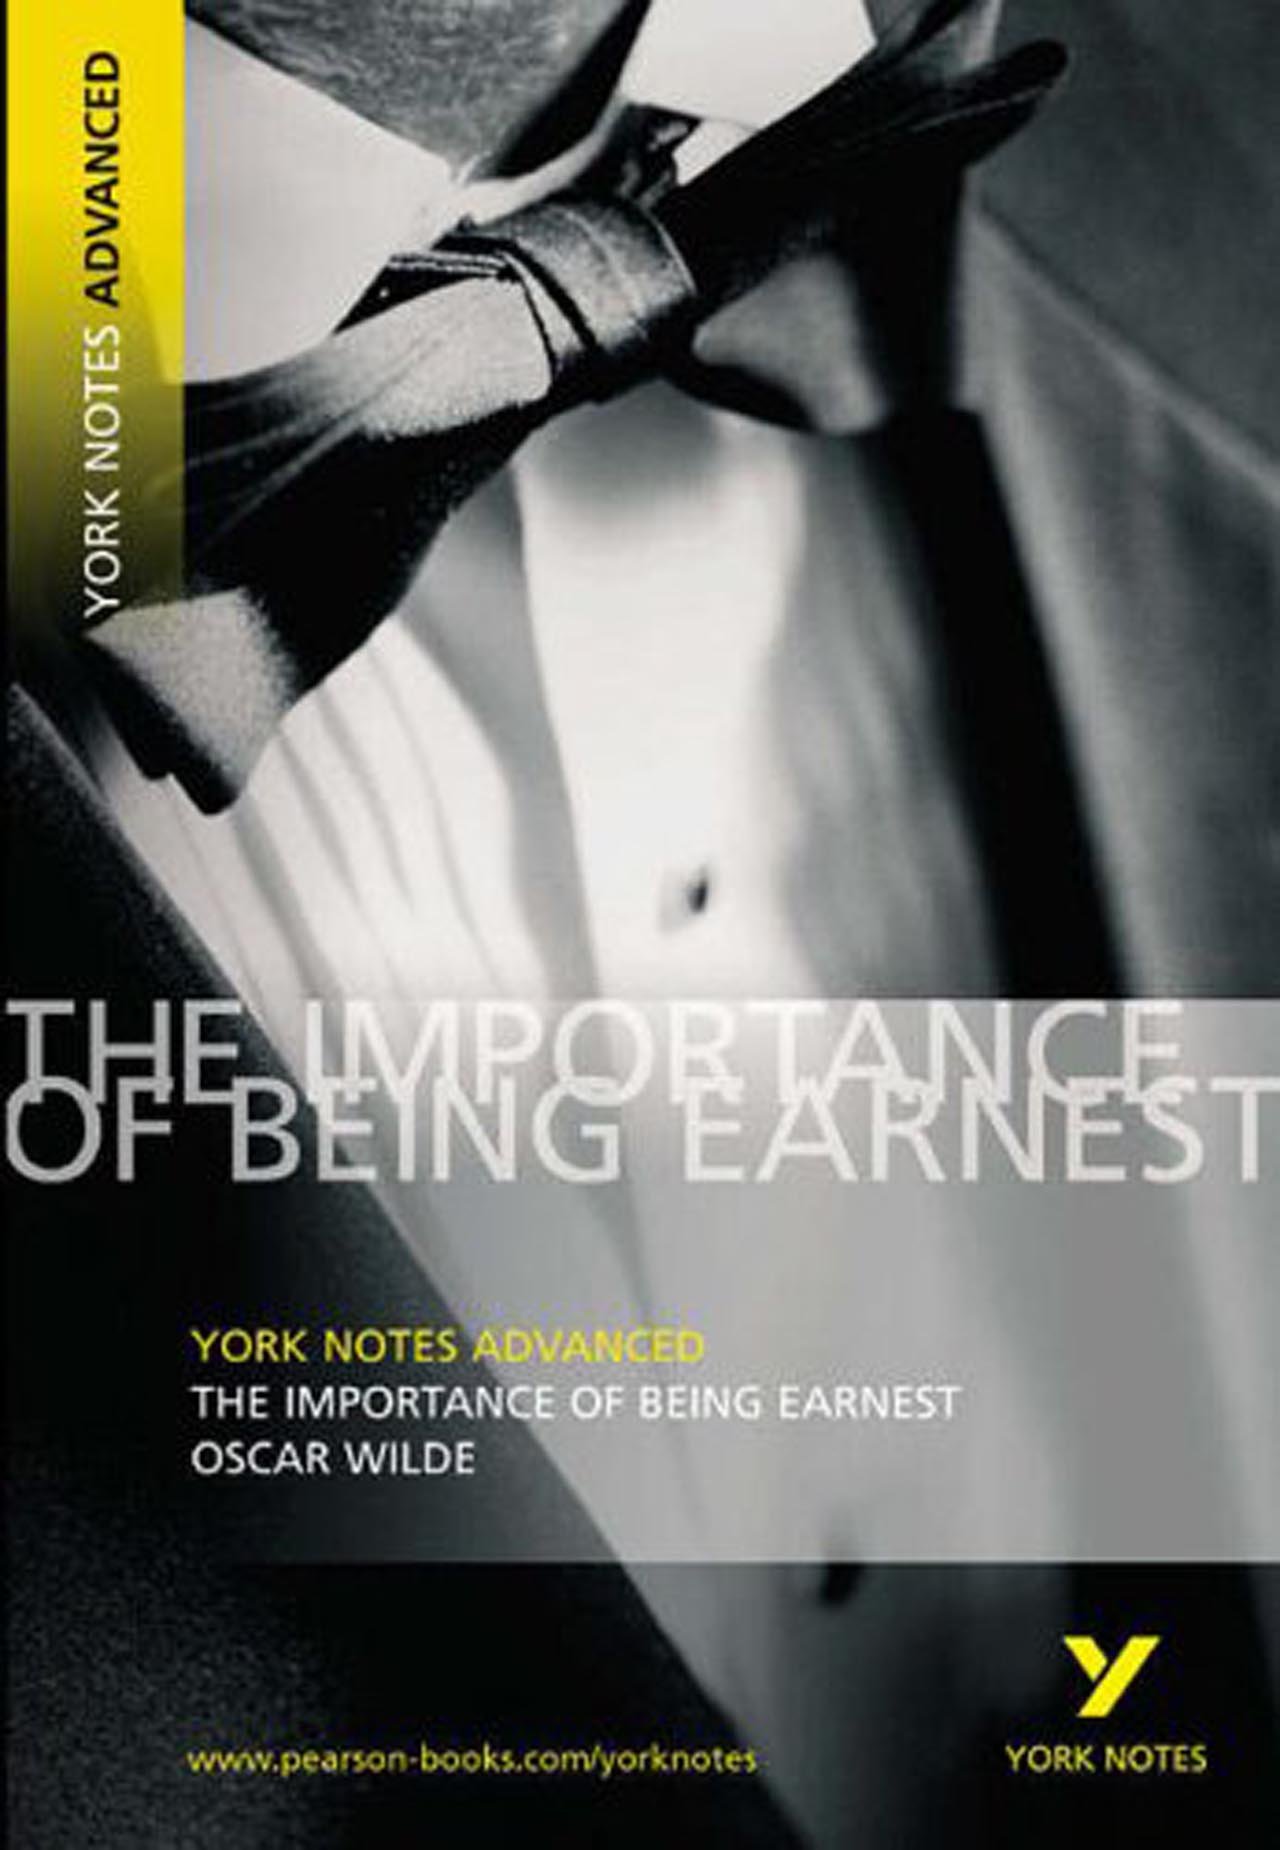 THE IMPORTANCE OF BEING EARNEST: YORK NOTES ADVANCED